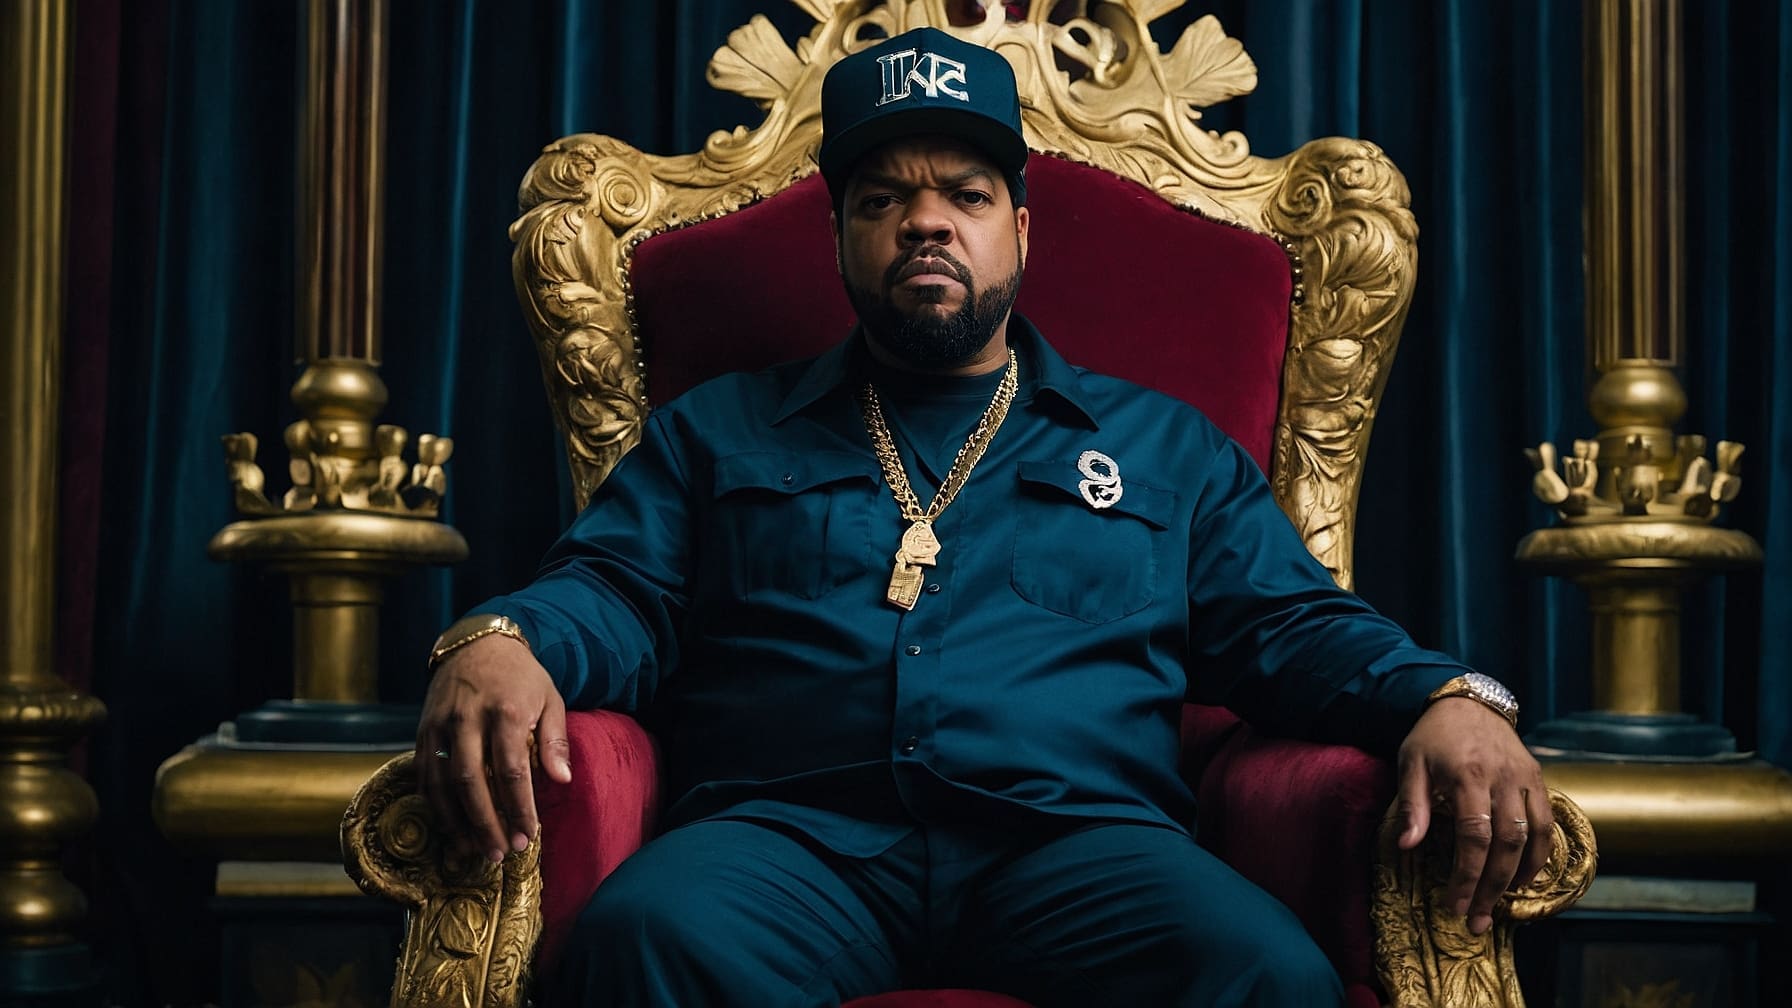 Ice_Cube_sitting_on_a_king_chair_with_his_crown_on_his